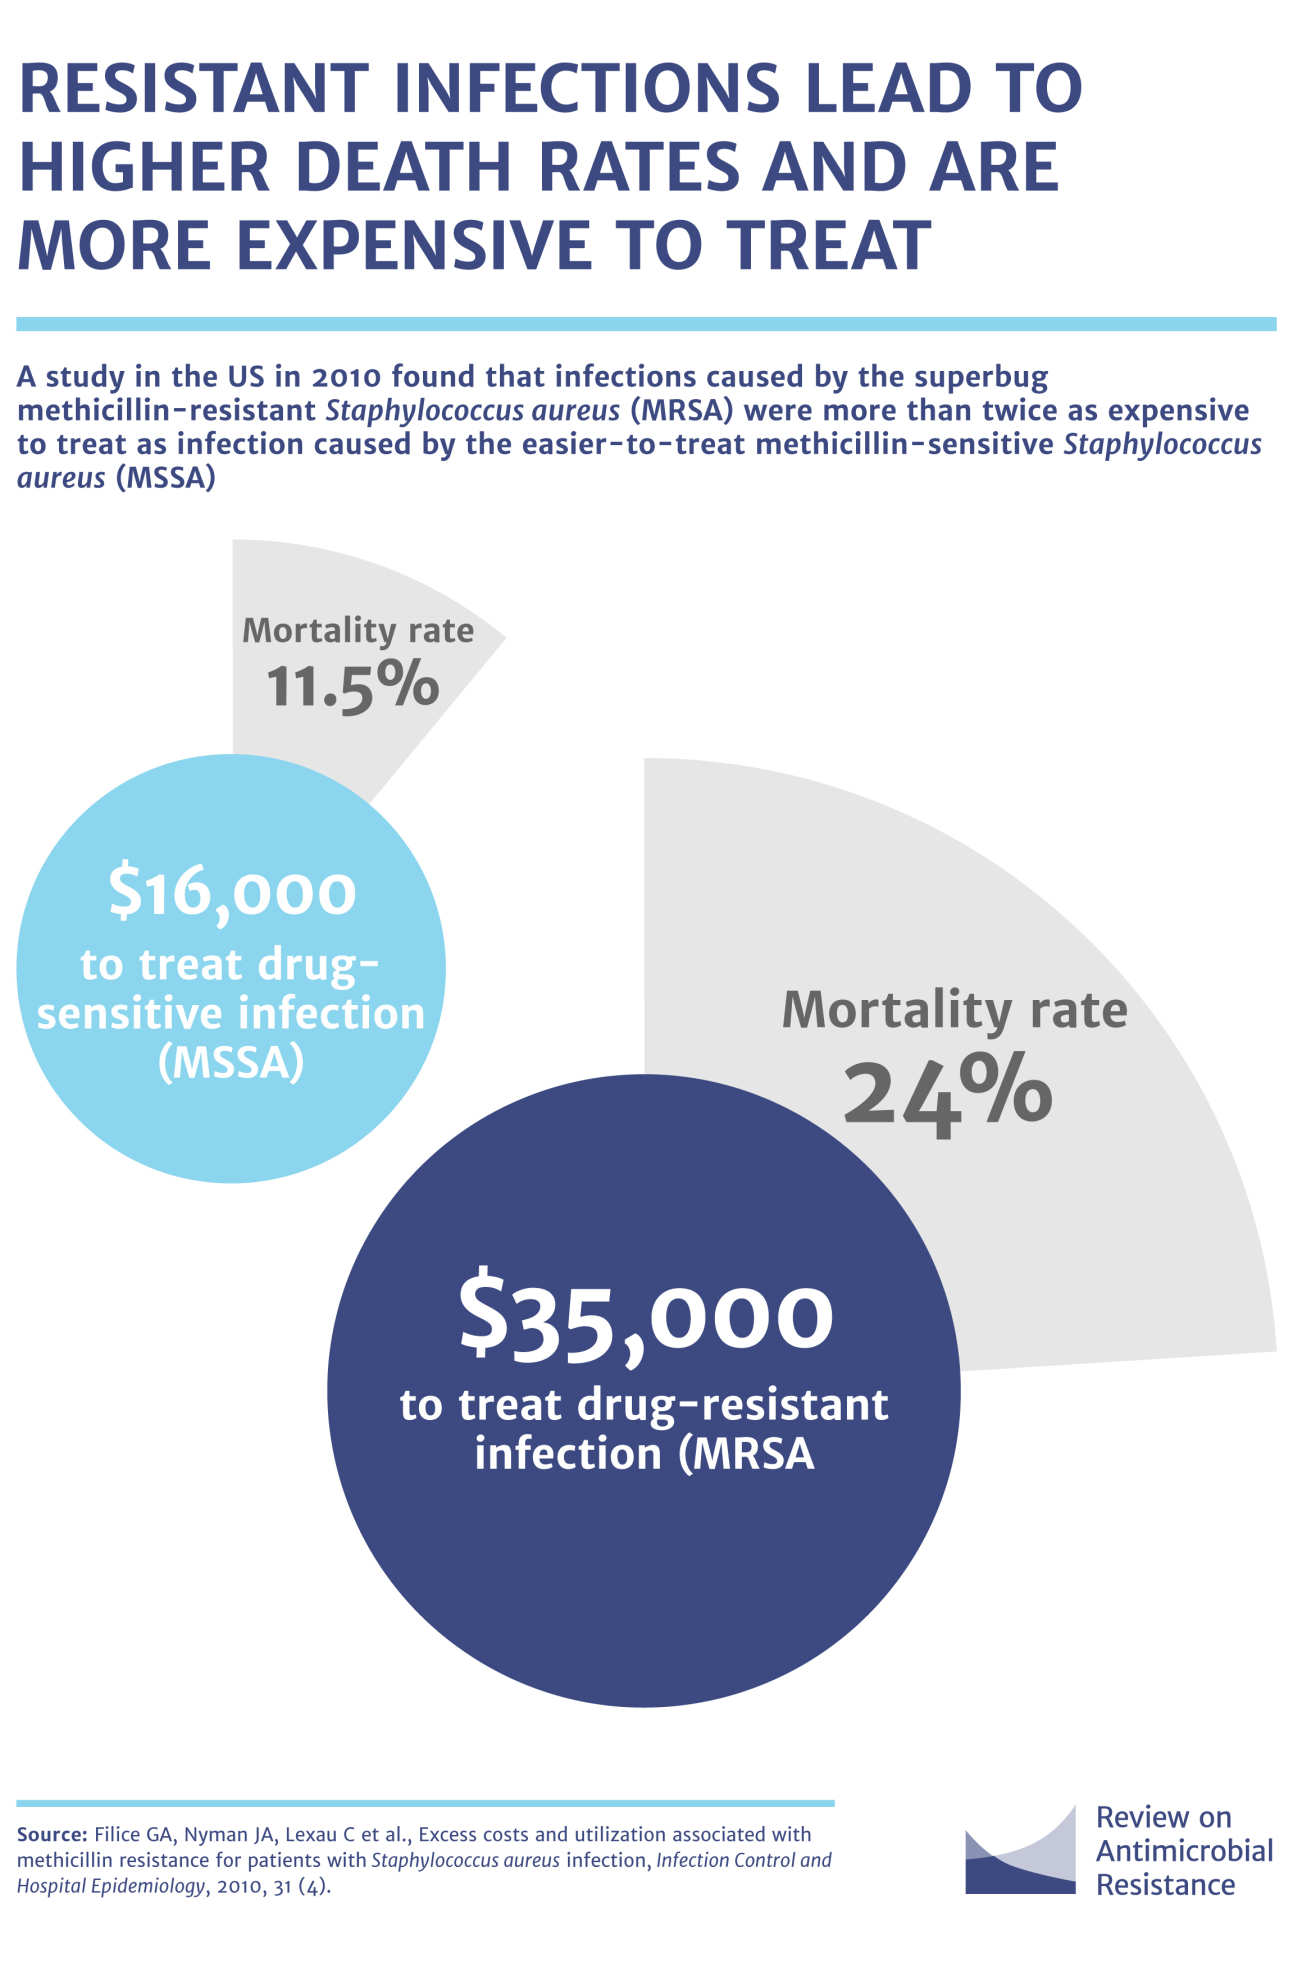 Infographic - Resistant infections lead to higher death rates and are more expensive to treat